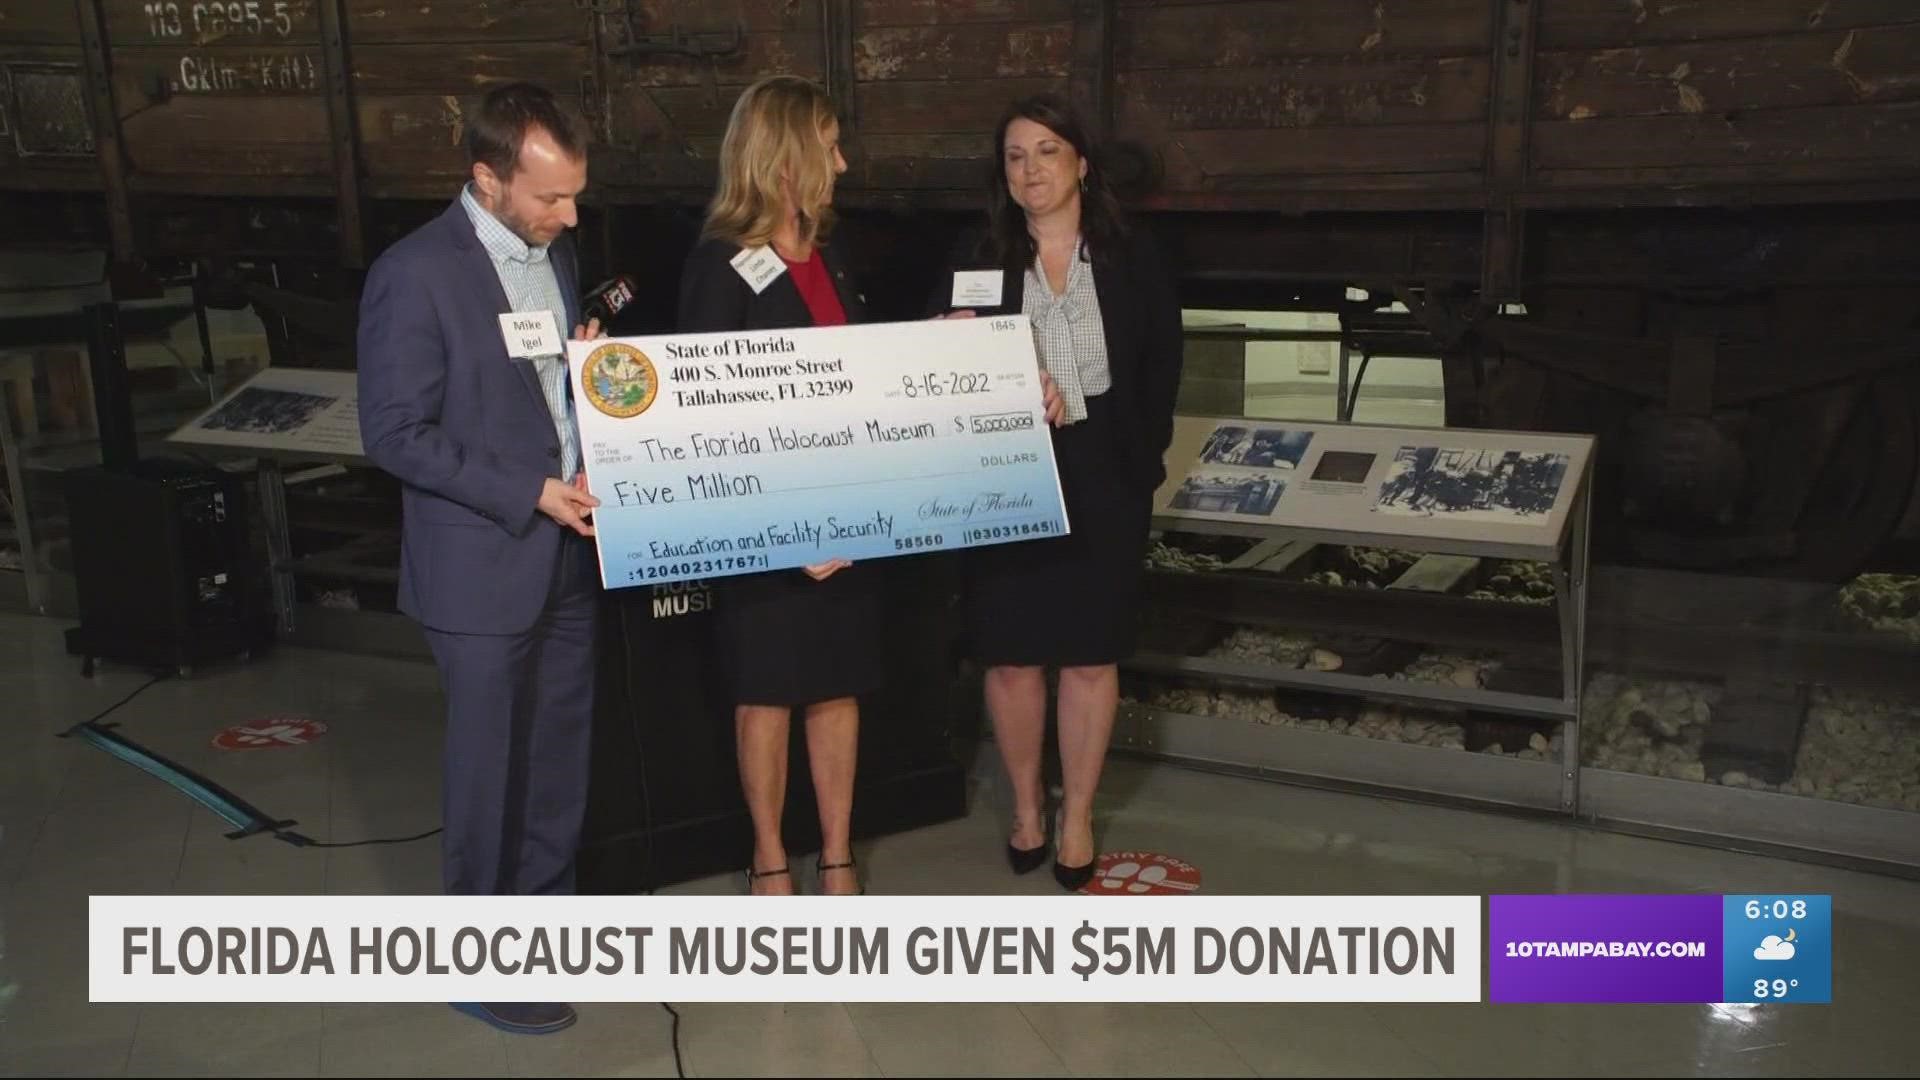 These funds will support technological improvements to help students and visitors engage with Holocaust survivor stories.